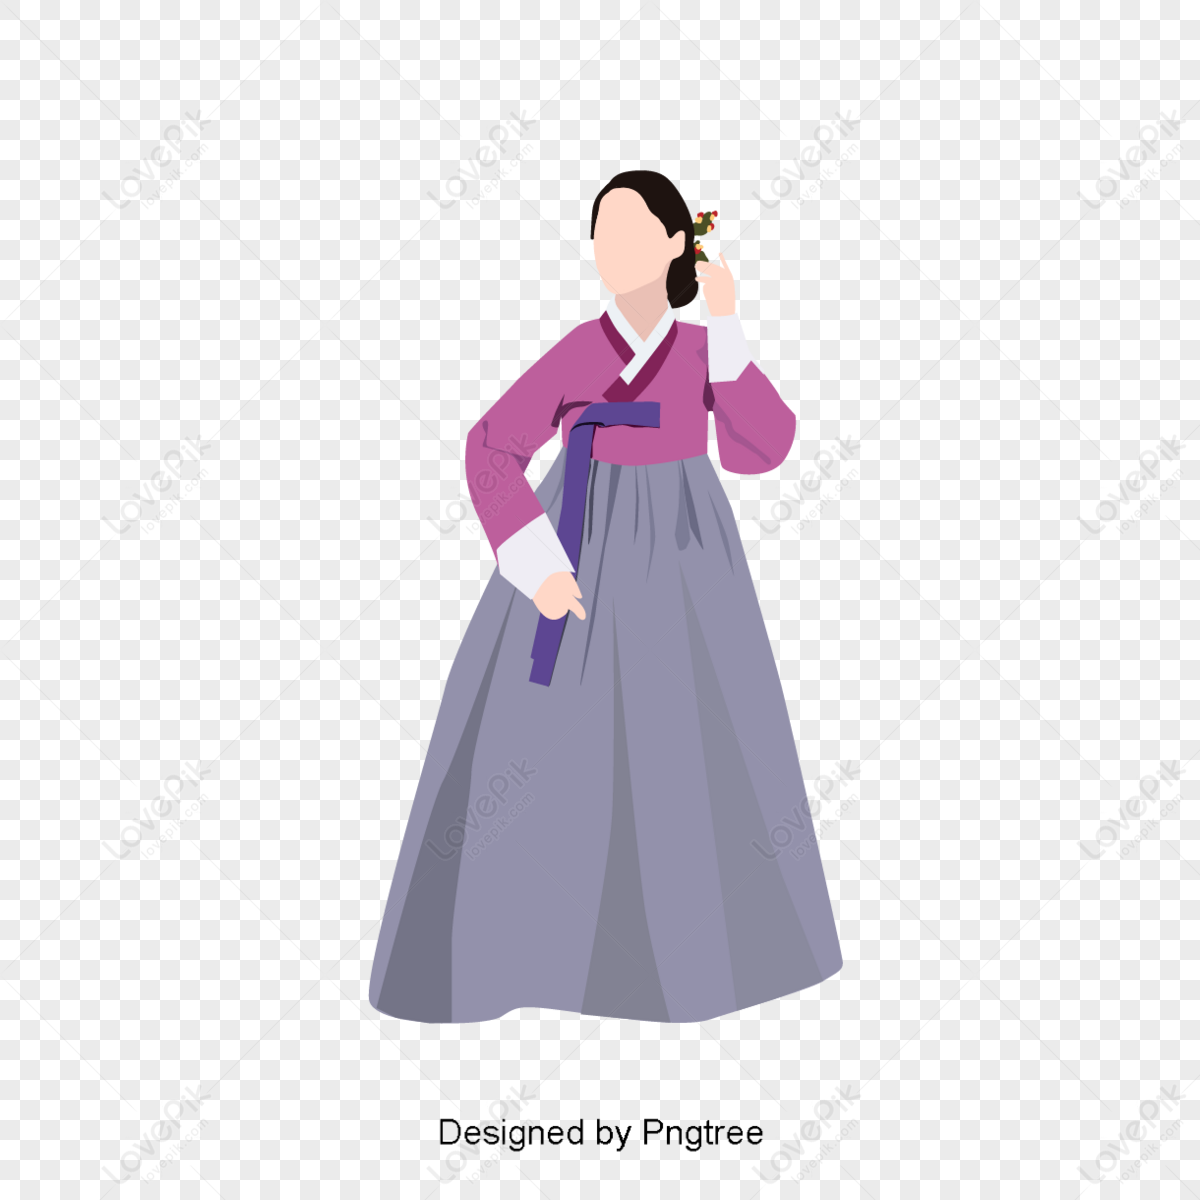 Korean Traditional Hanbok PNG Images With Transparent Background | Free ...